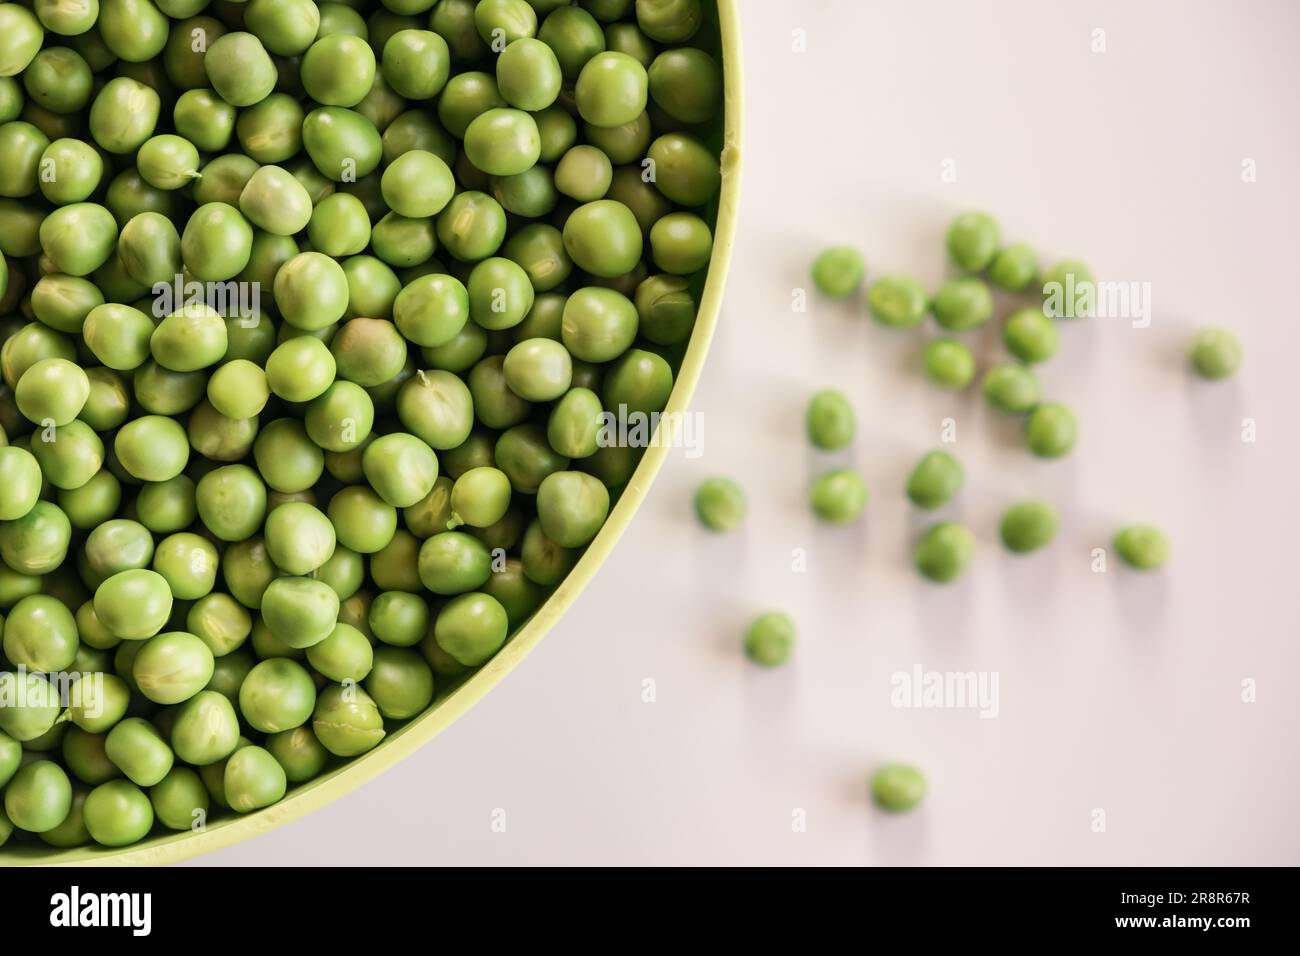 Fresh green garden peas in a green bowl isolated on white. Top view. Stock Photo